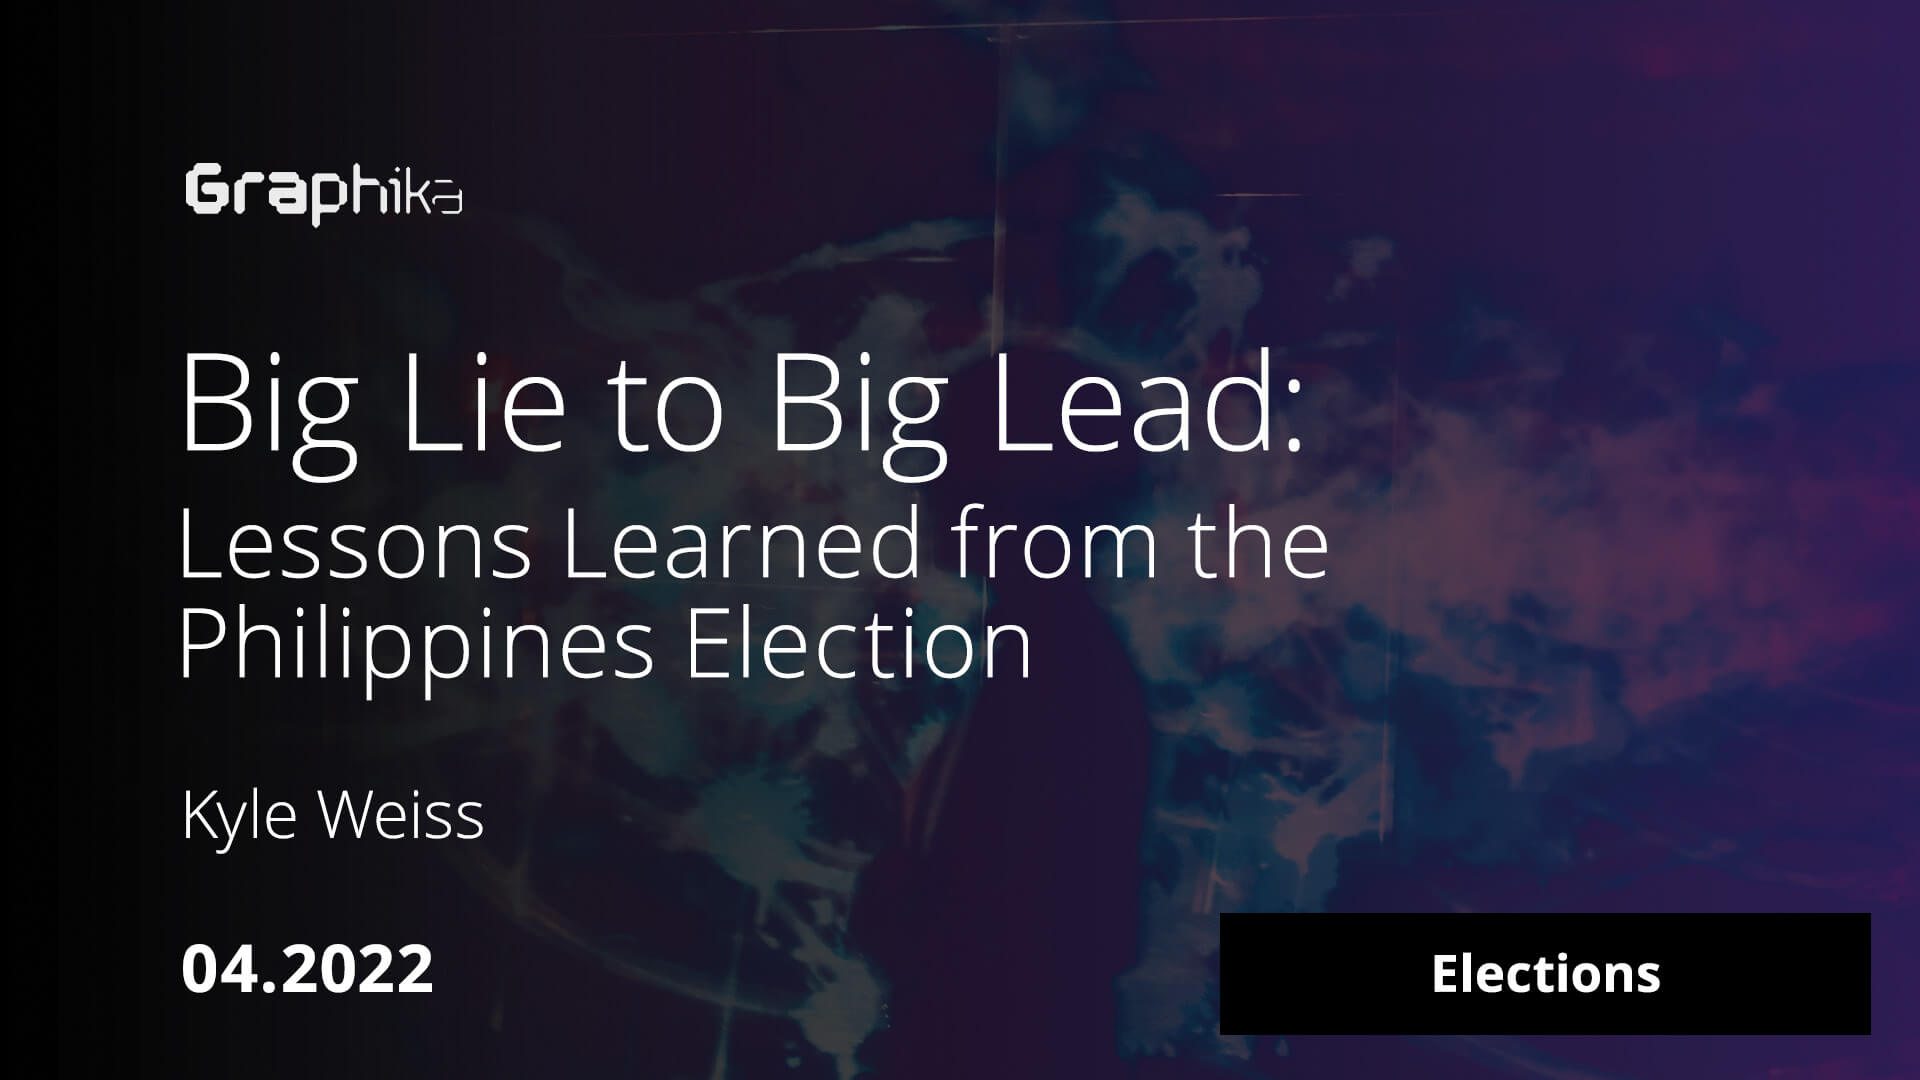 Big Lie to Big Lead: Lessons Learned from the Philippines Election